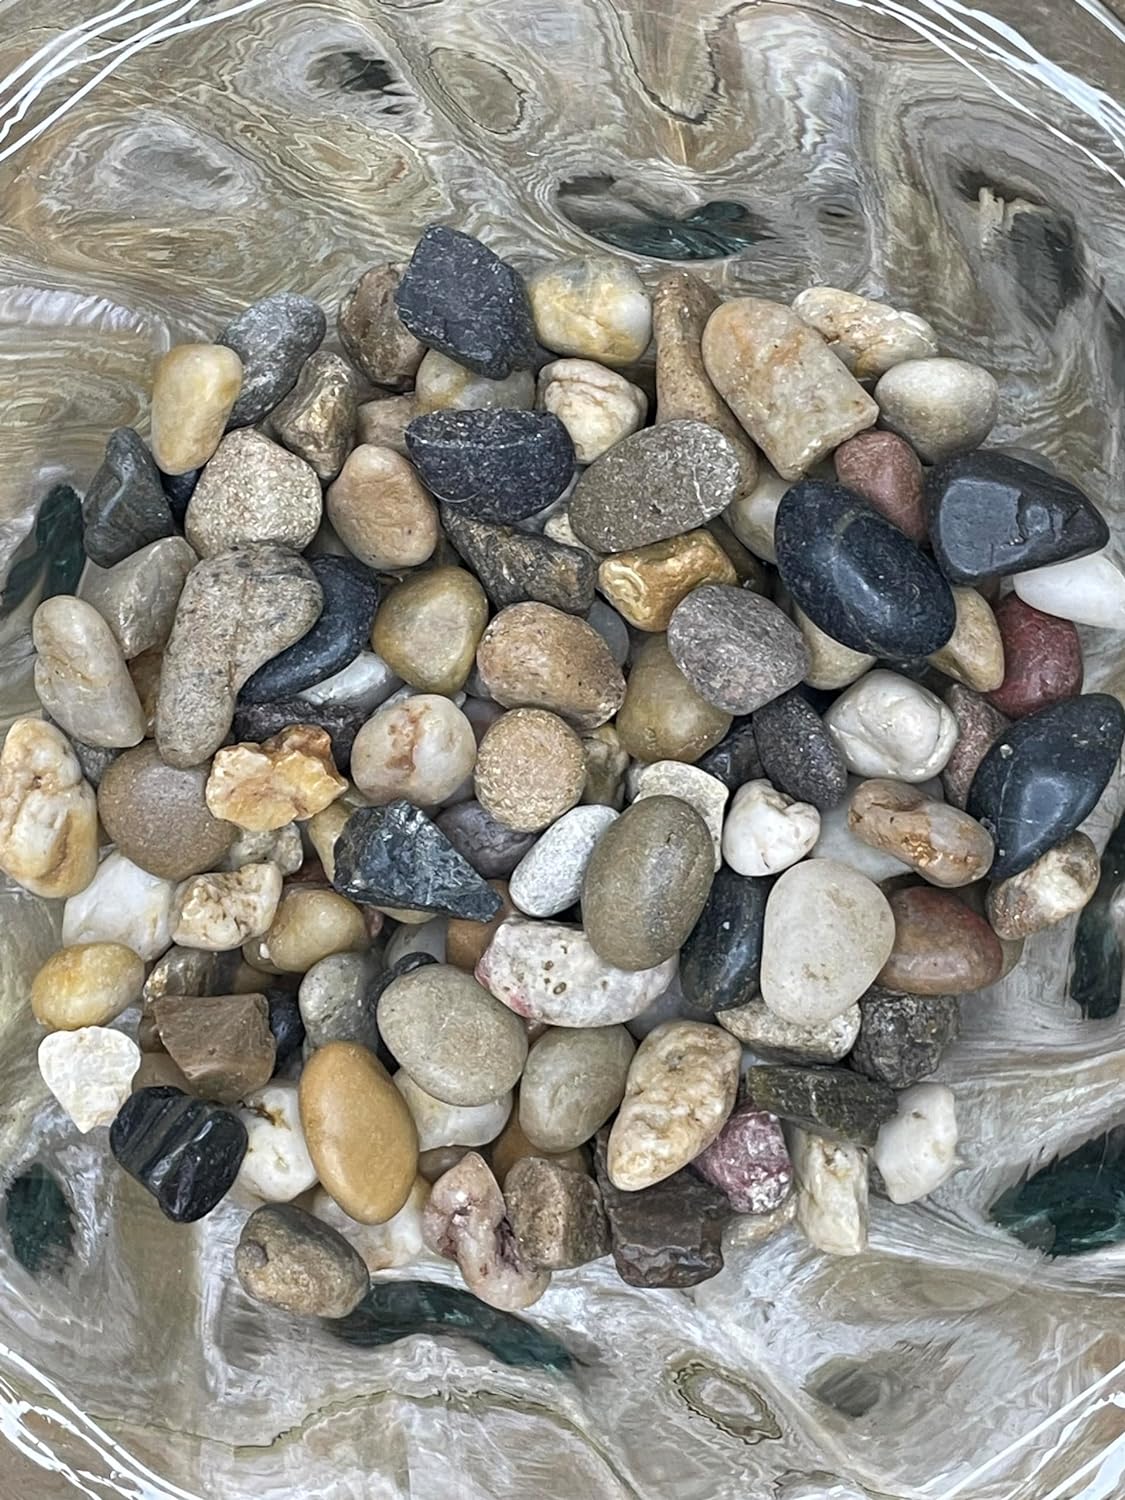 Natural Decorative Pebbles in Varied Sizes and Colors, 3/8 to 1-1/2 Inches Long, 1.6 Pounds, Vase and Bowl Fillers, Clean with Tumbled Edges